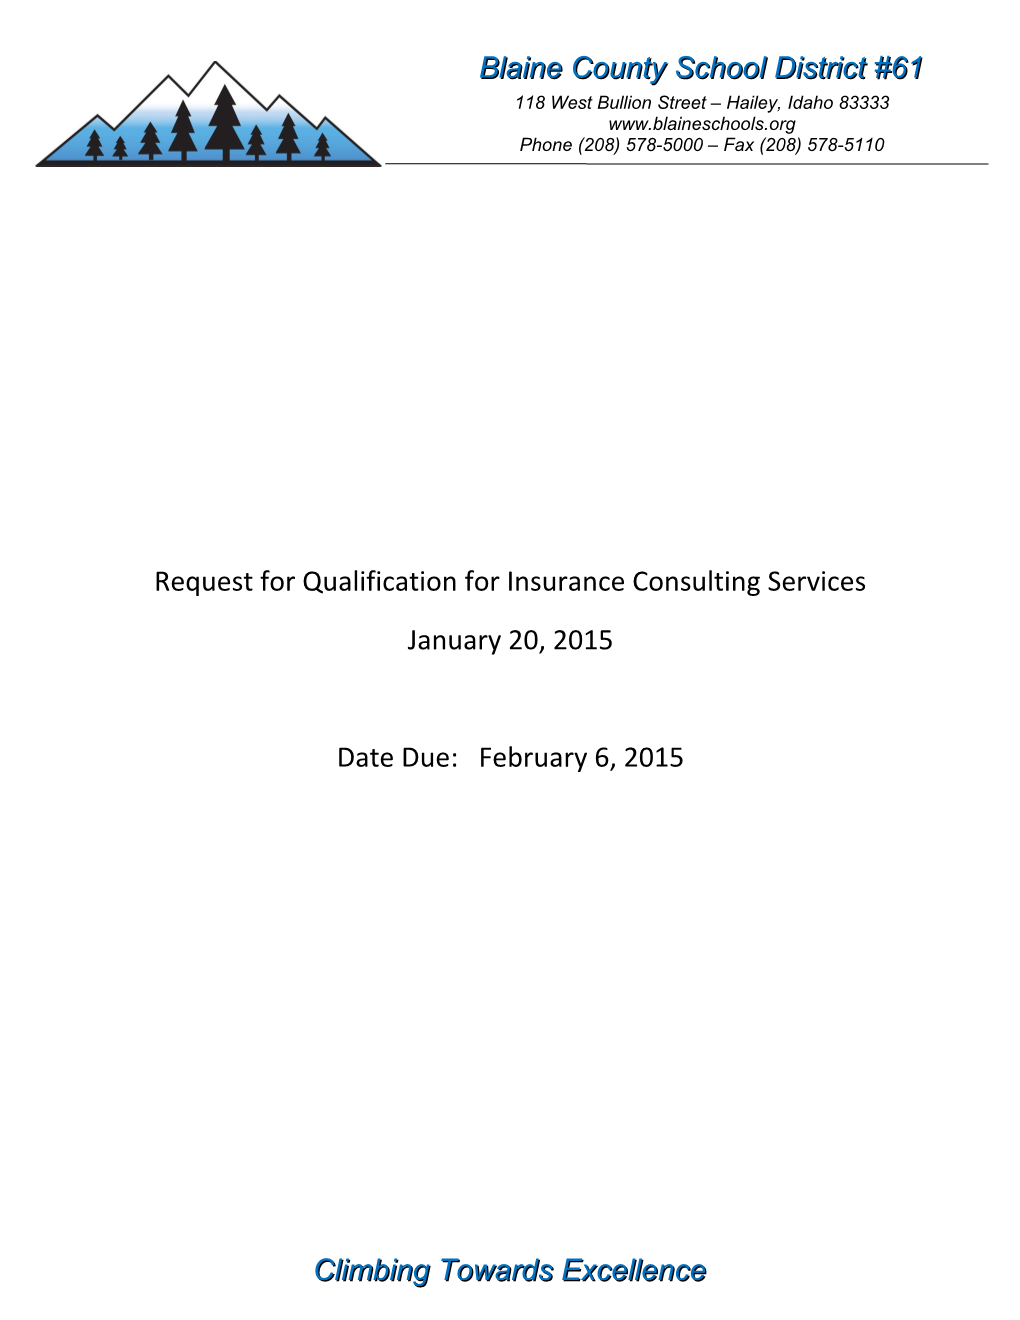 Request for Qualification for Insurance Consulting Services